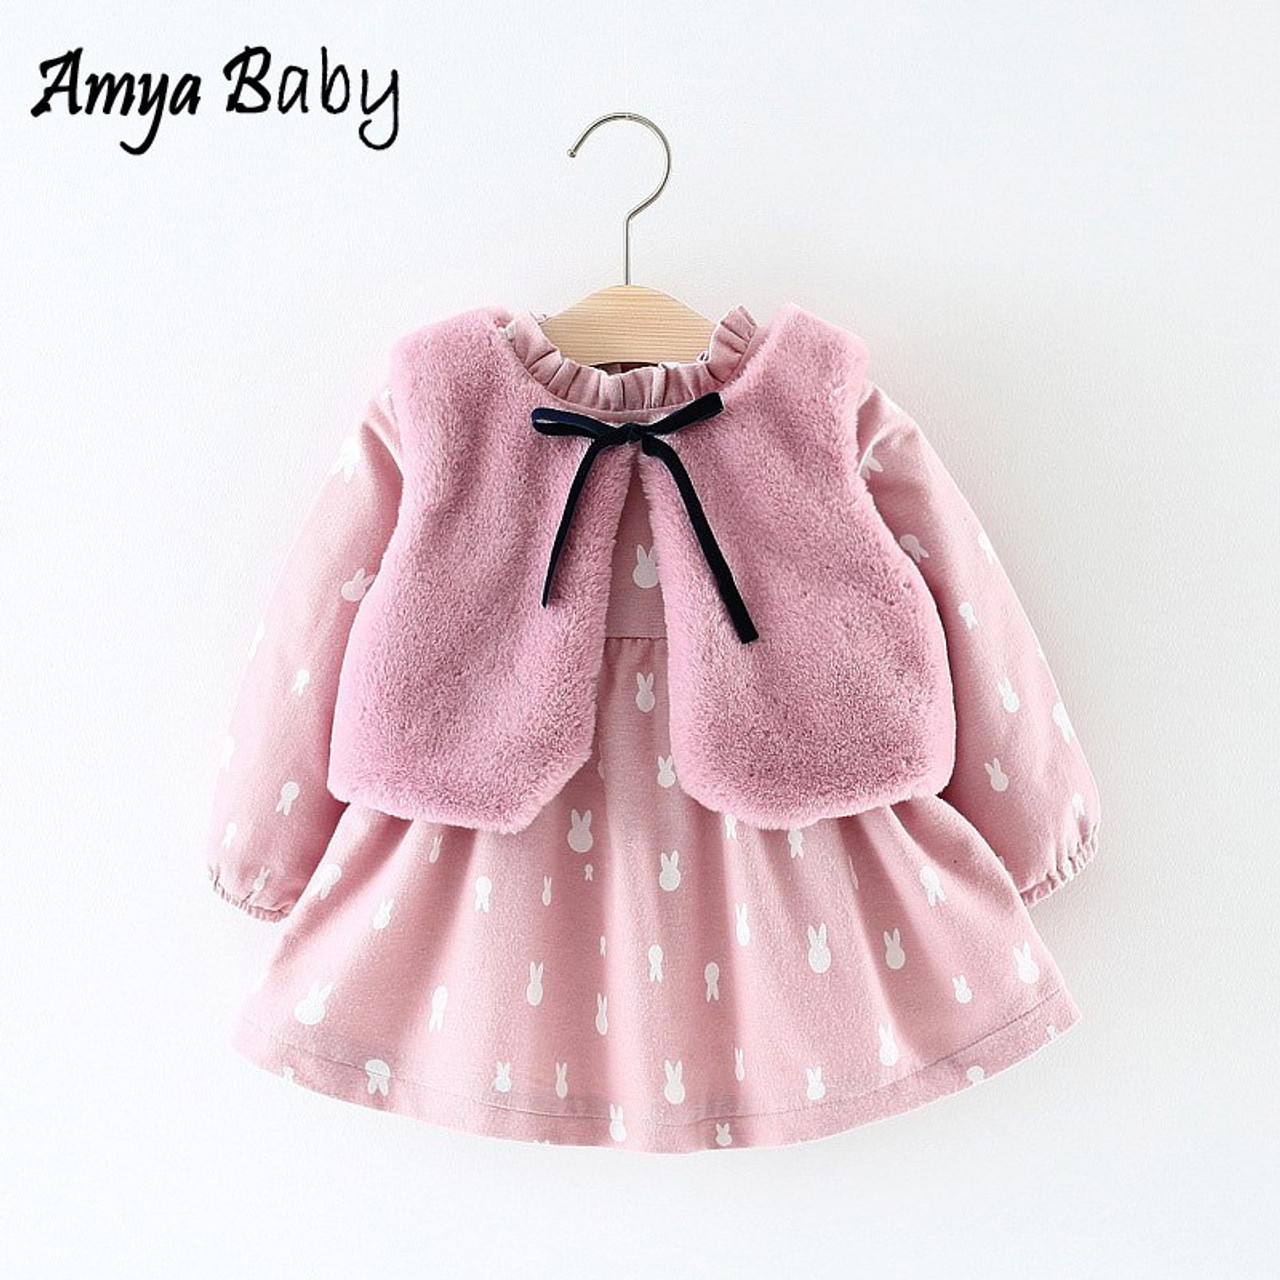 newborn outfits for baby girl